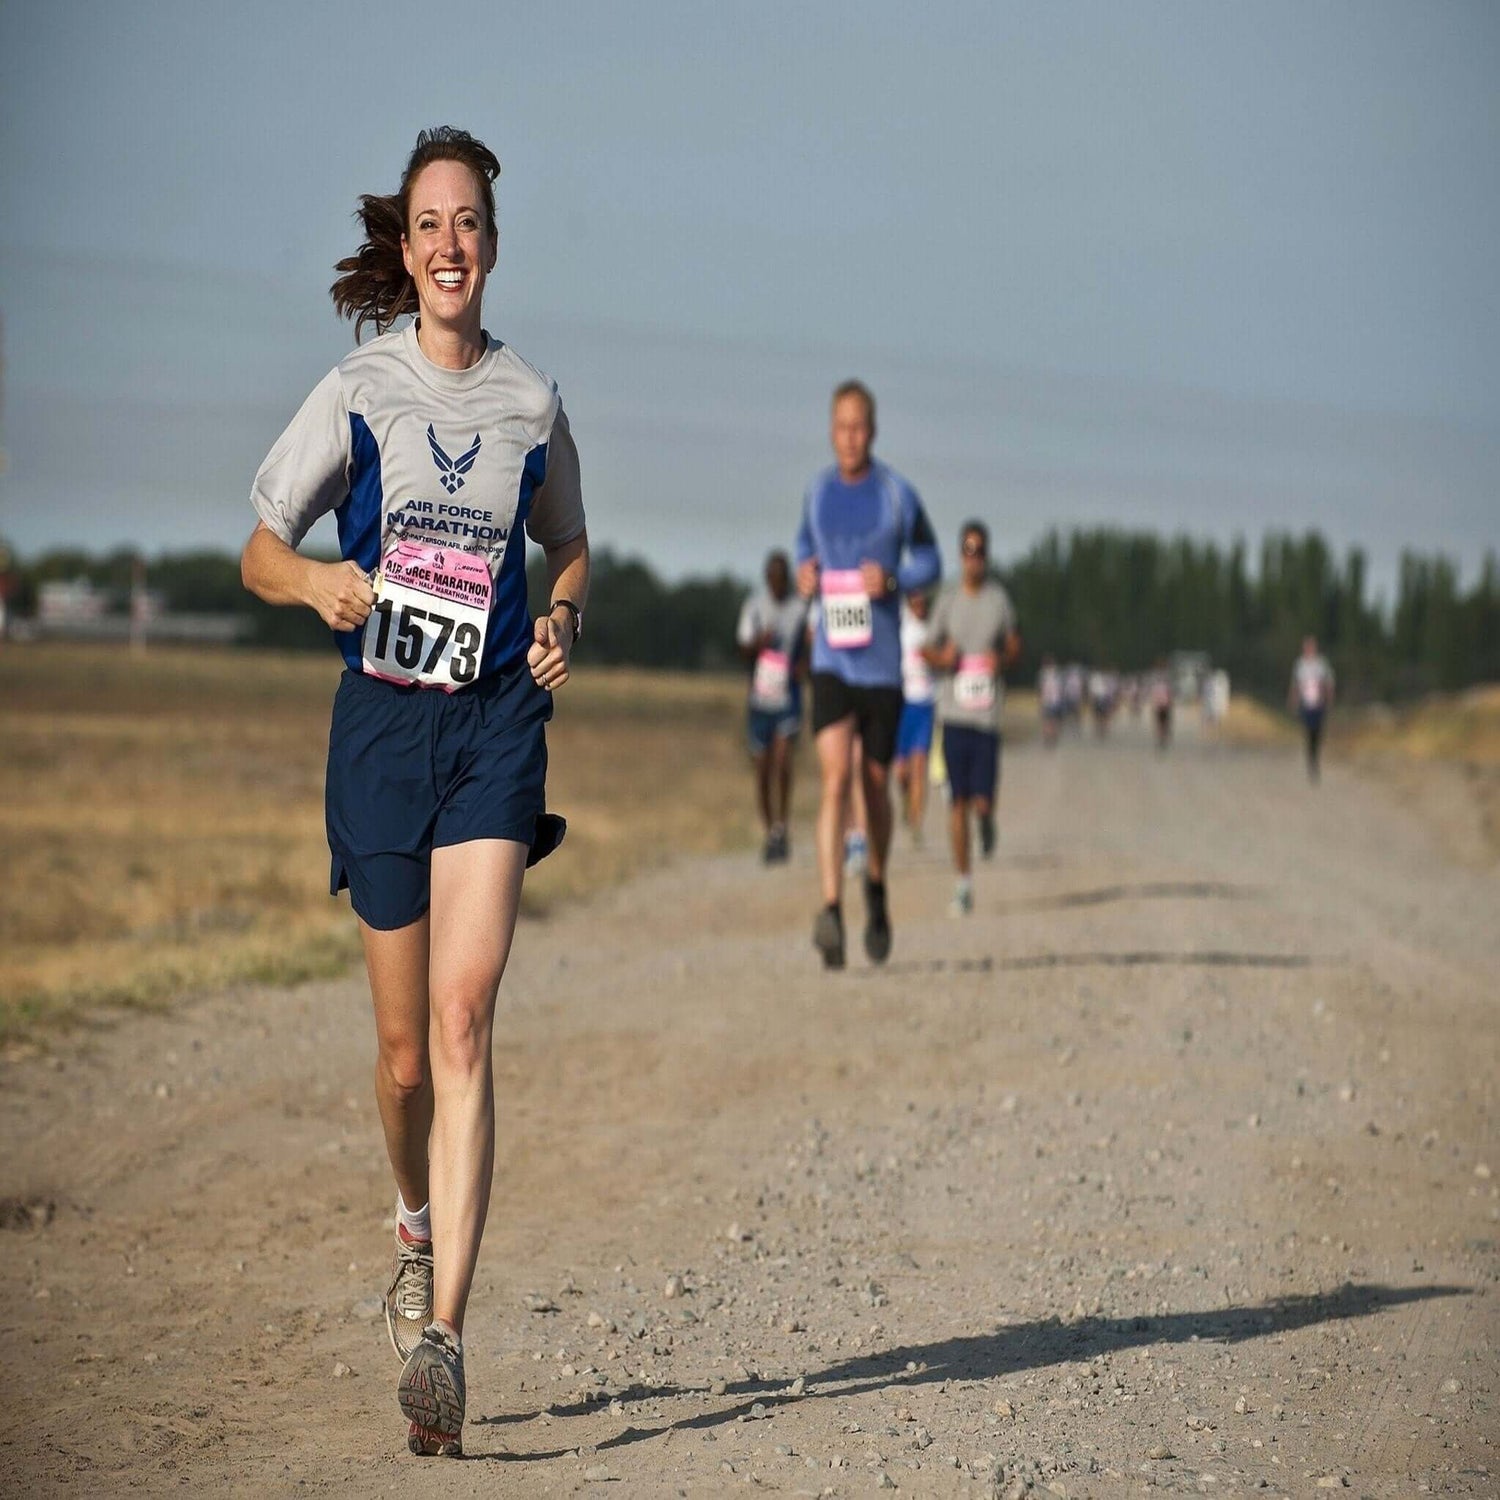 Picture of a woman running, leading the pack. Other runners are far behind her, on a long dusty track. She is smiling as she is winning the race.